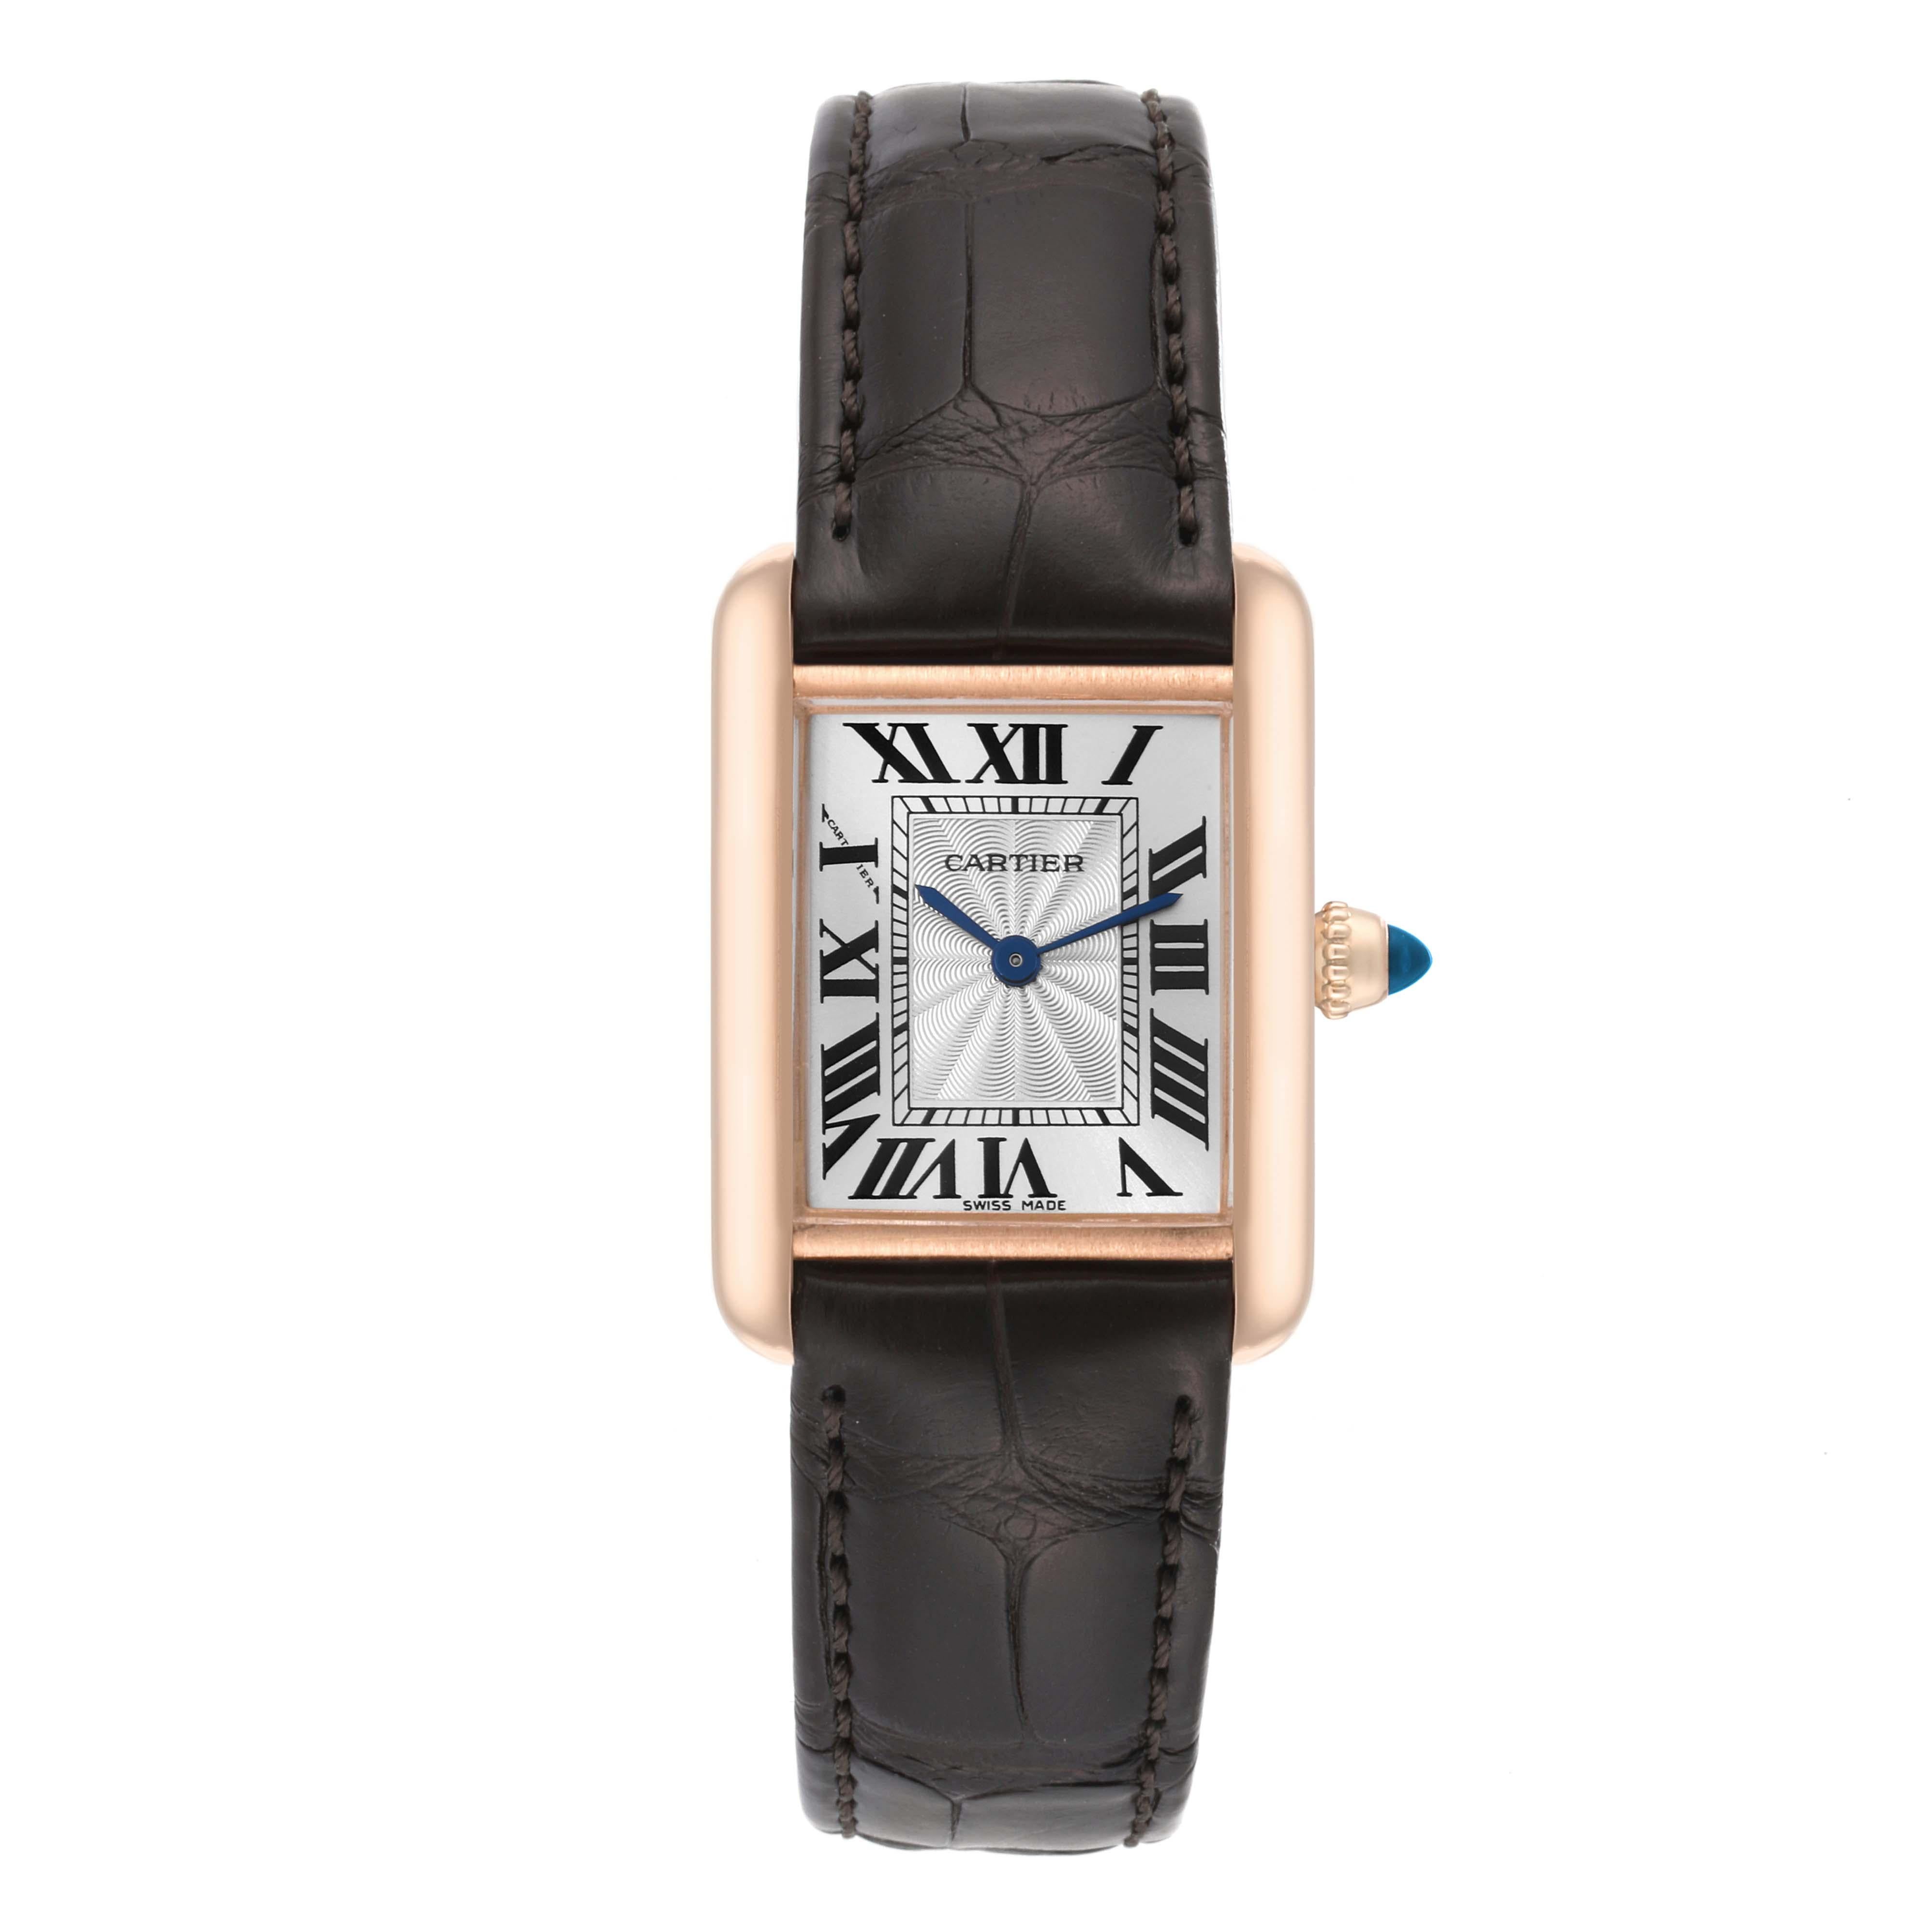 Cartier Tank Louis Rose Gold Mechanical Ladies Watch WGTA0010 Card. Manual winding movement. 18k rose gold case 29.5 x 22.0 mm. Circular grained crown set with a blue sapphire cabochon. . Scratch resistant sapphire crystal. Silvered guilloche dial